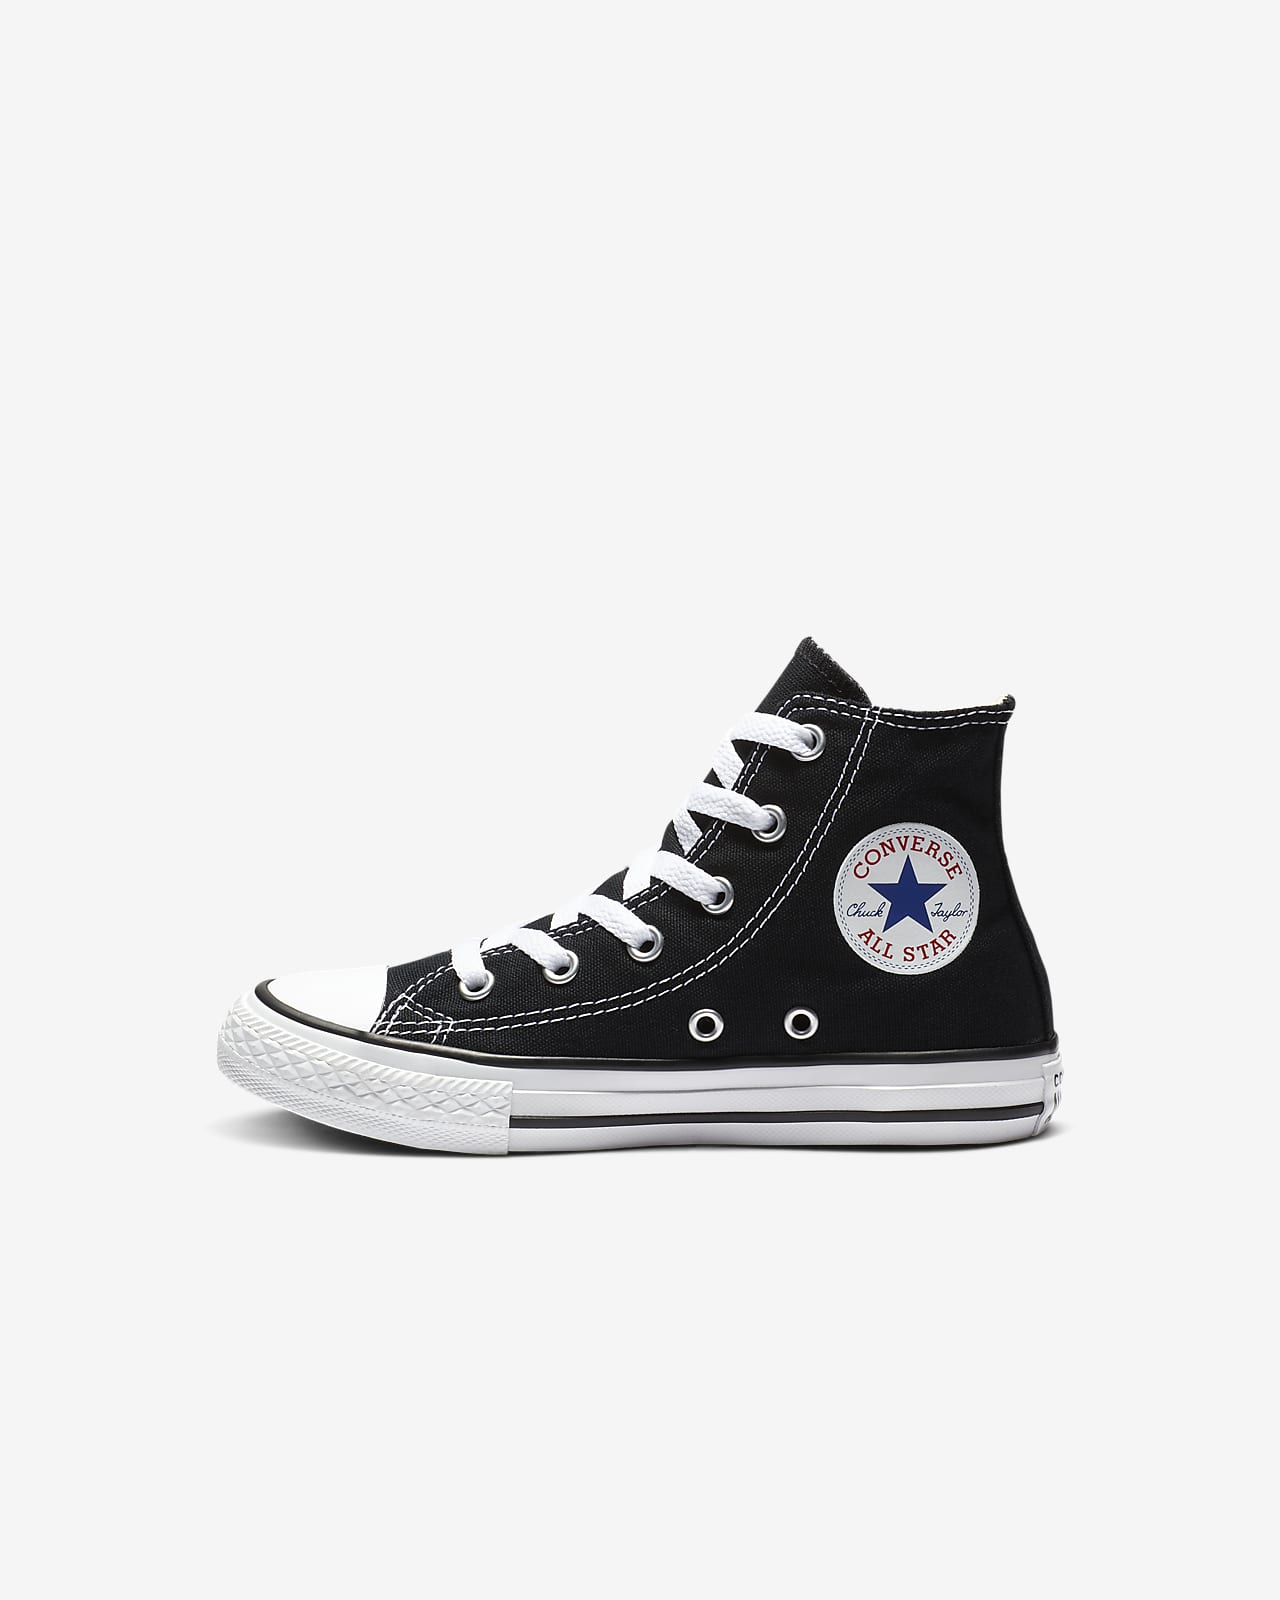 converse chuck taylor all star party dress low top